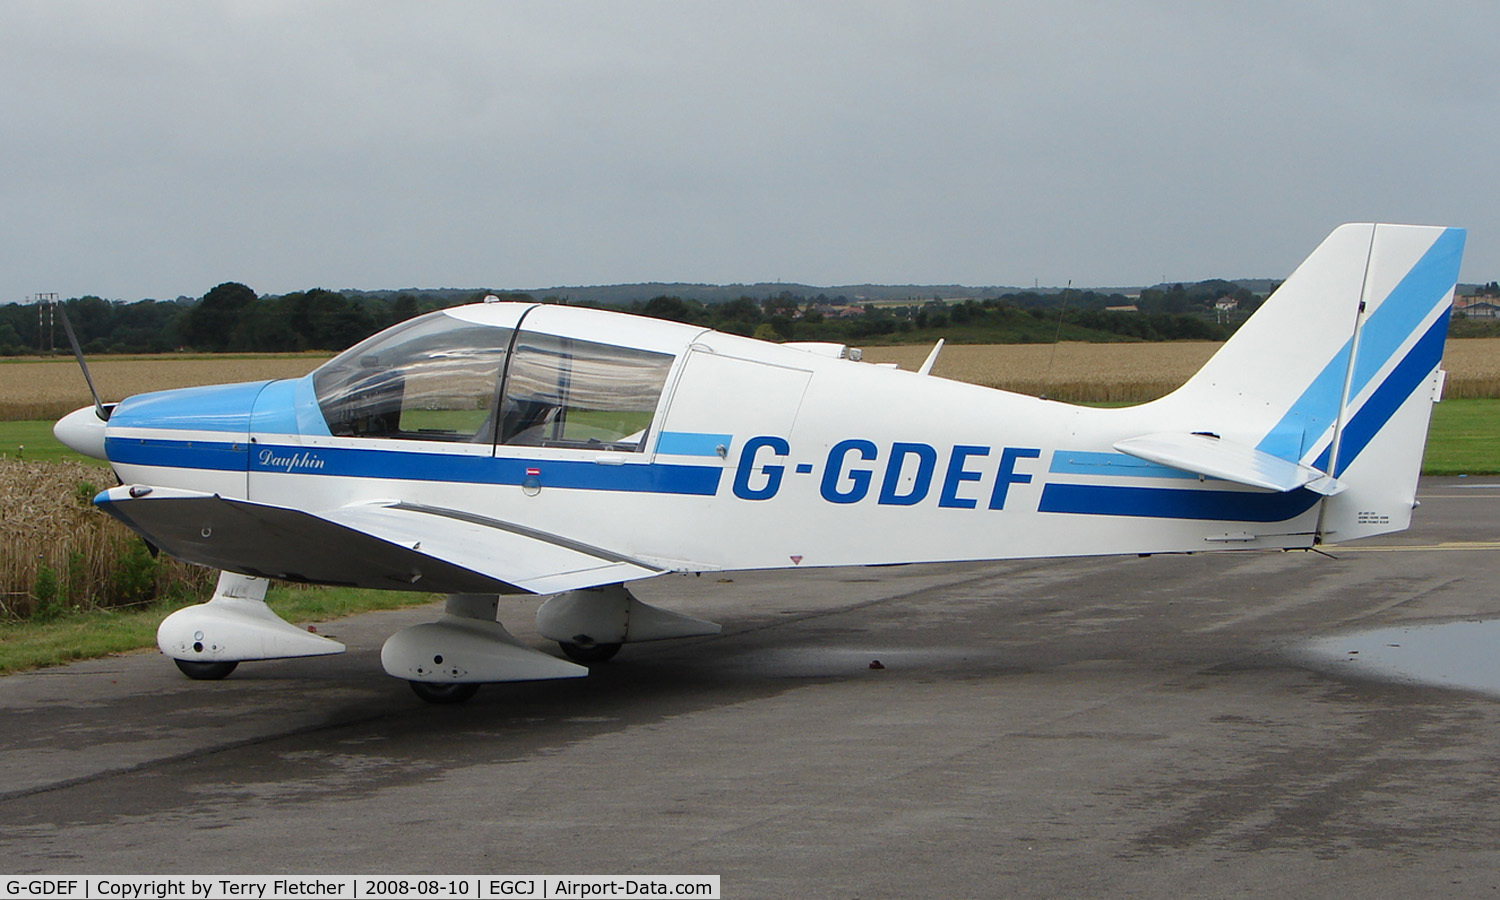 G-GDEF, 1981 Robin DR-400-120 Petit Prince C/N 1538, Resident aircraft at Sherburn - seen during 2008 LAA Regional Fly in